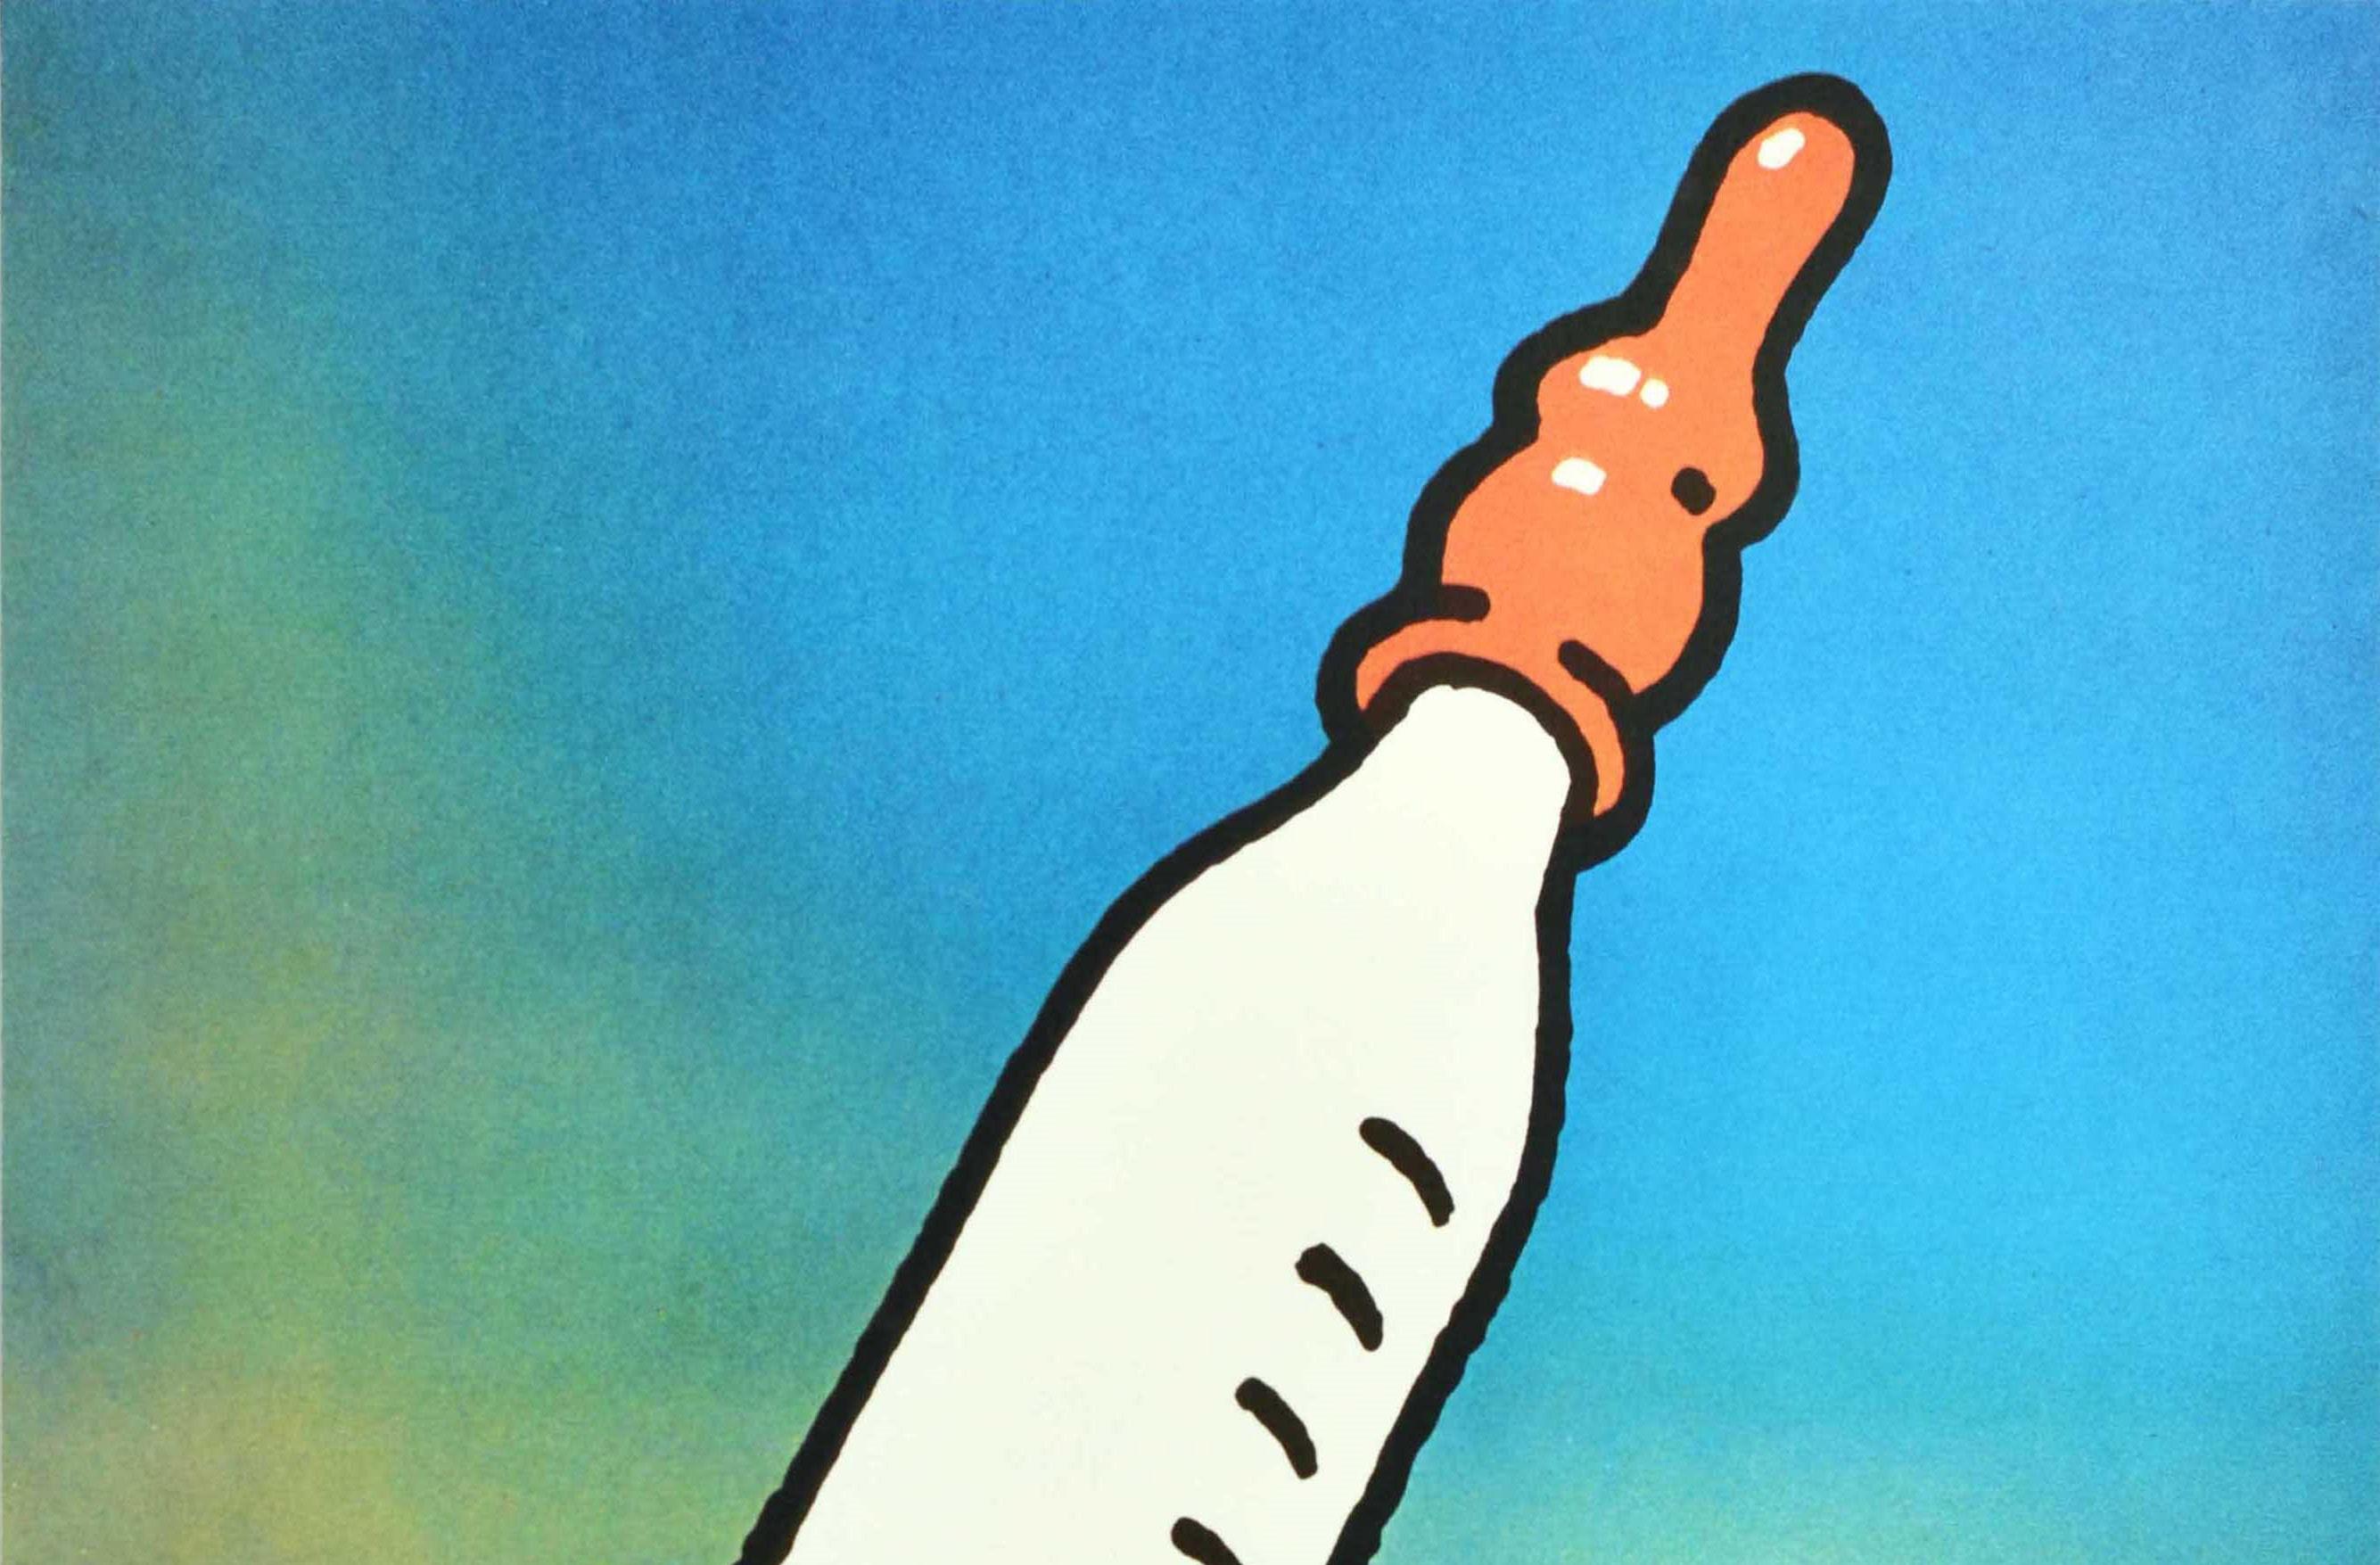 Original vintage Soviet space propaganda poster - peaceful space for future generations! Colourful design depicting a baby bottle shooting up like a rocket with the stylised lettering below. Very good condition, minor creasing, small tears on edges.